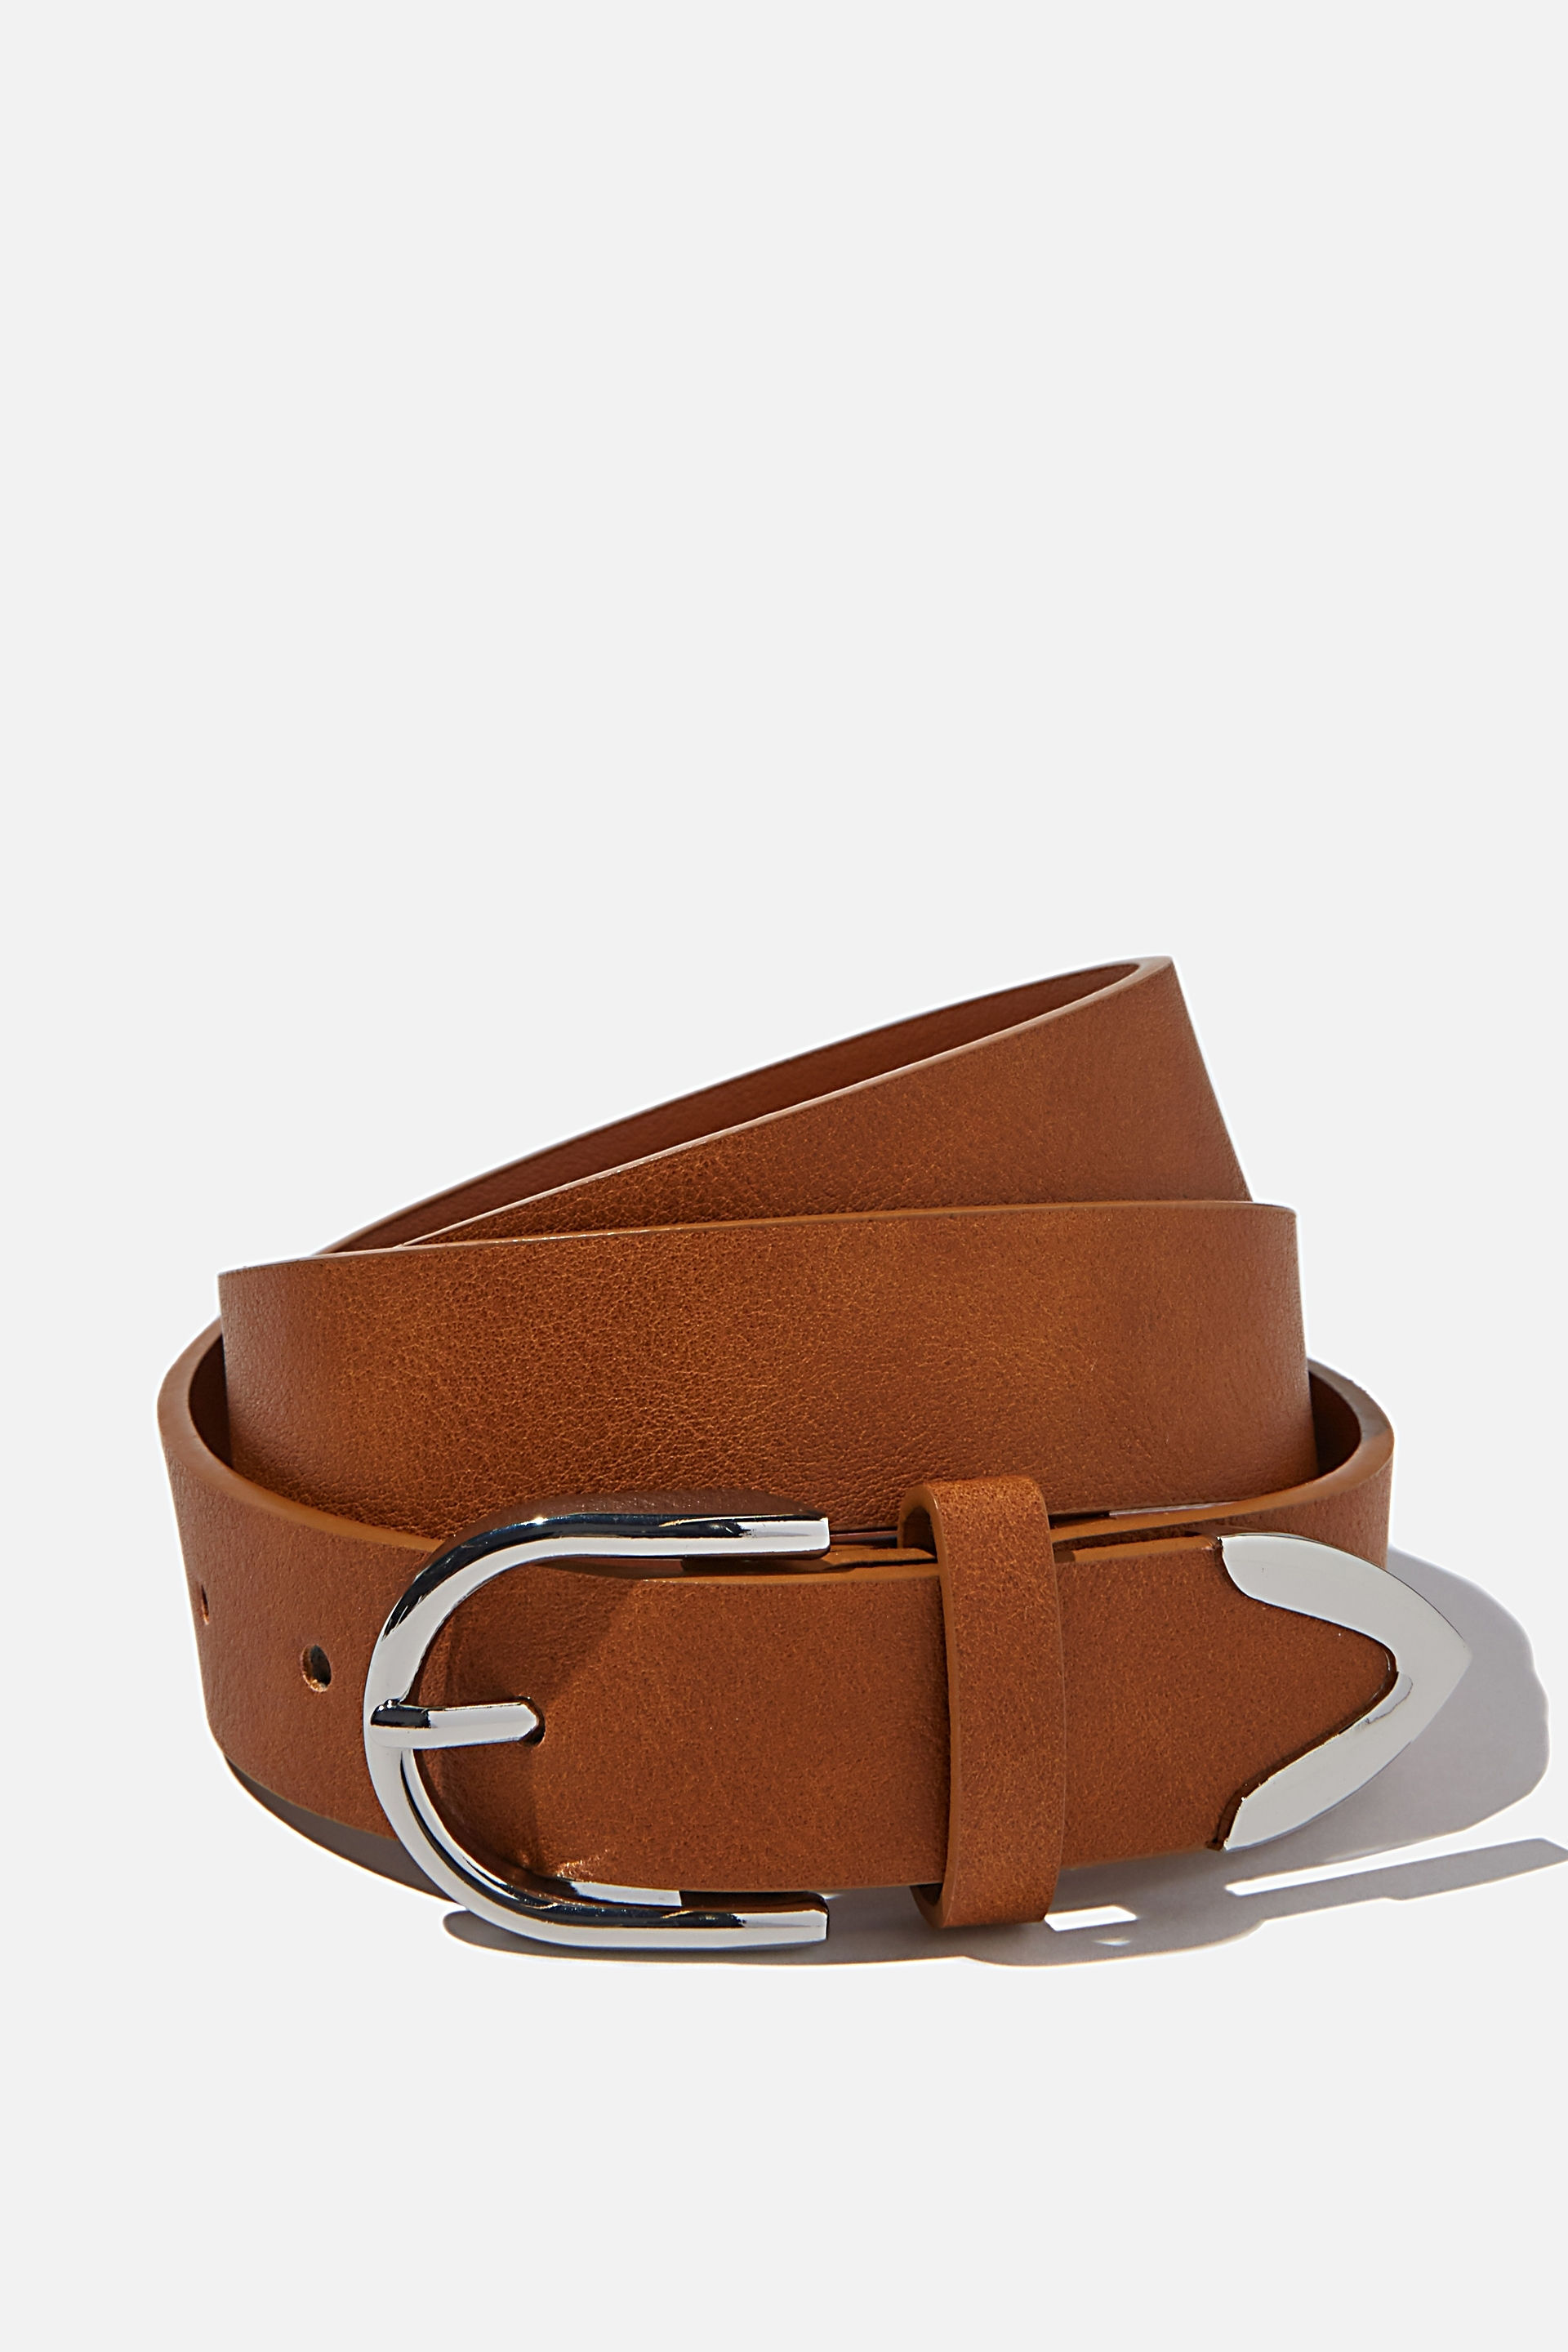 Rubi - To The Point Buckle Belt - Tan/ silver